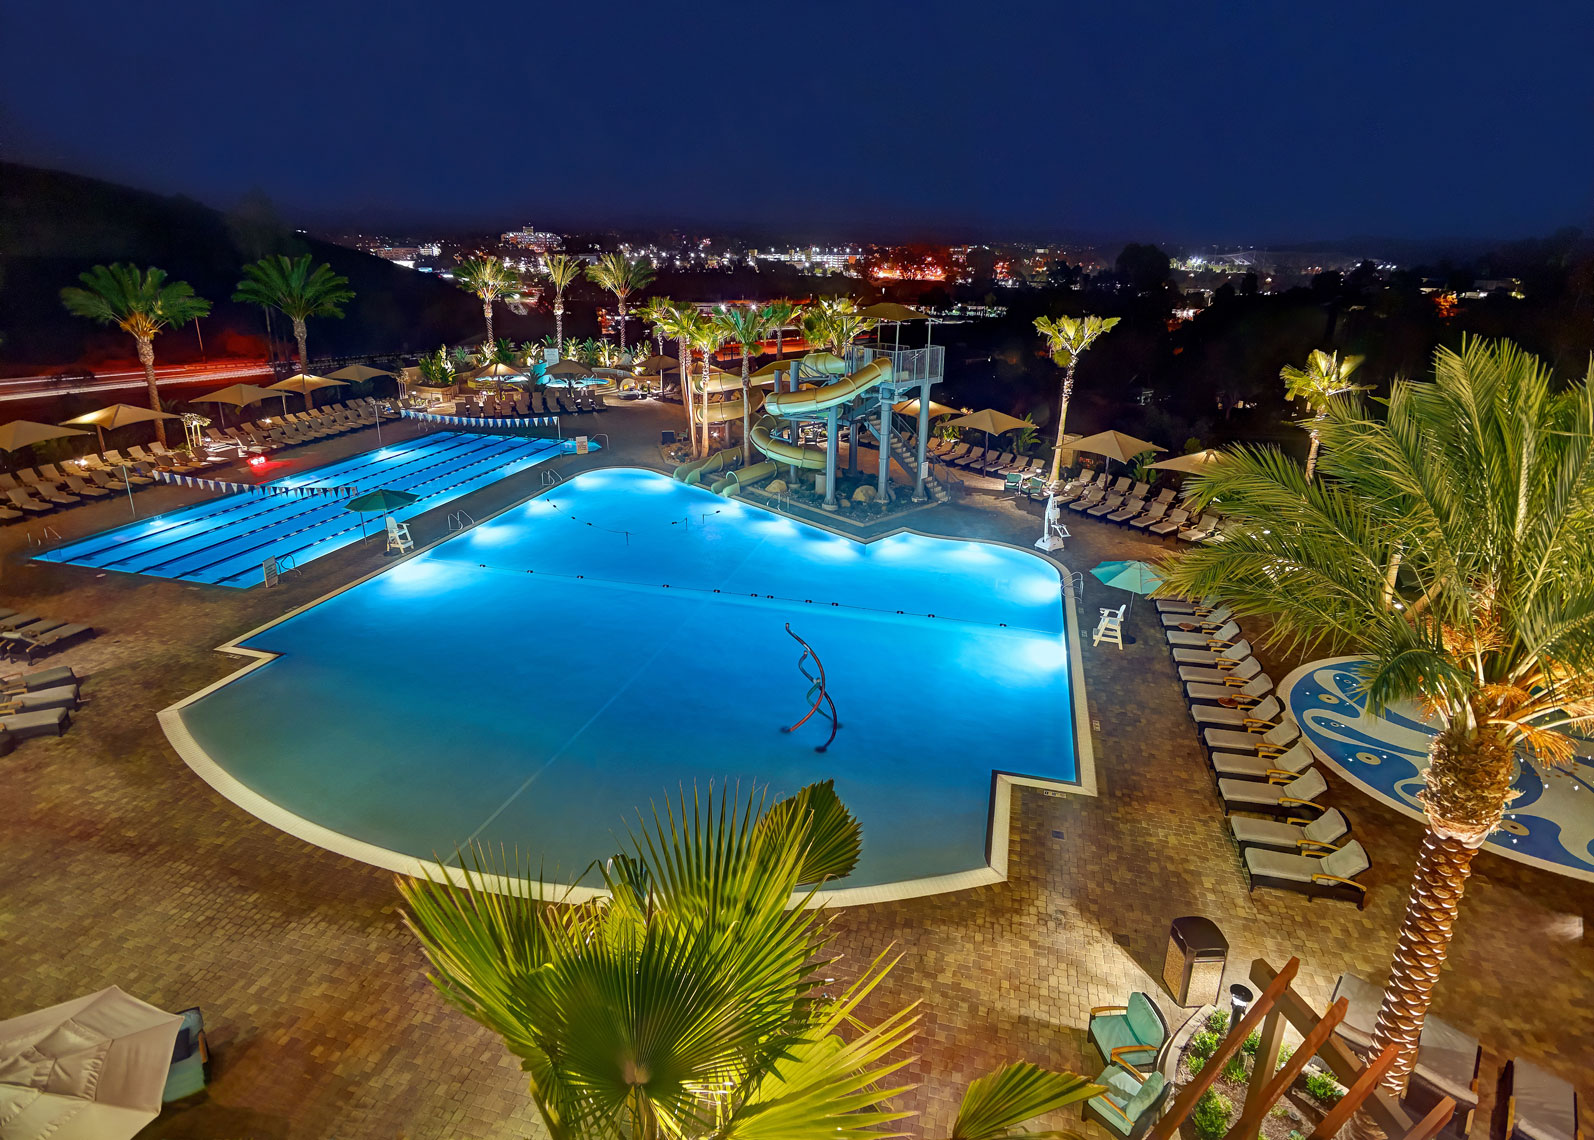 Pools/twisty slide/ lights/pool and deck/architectural photo